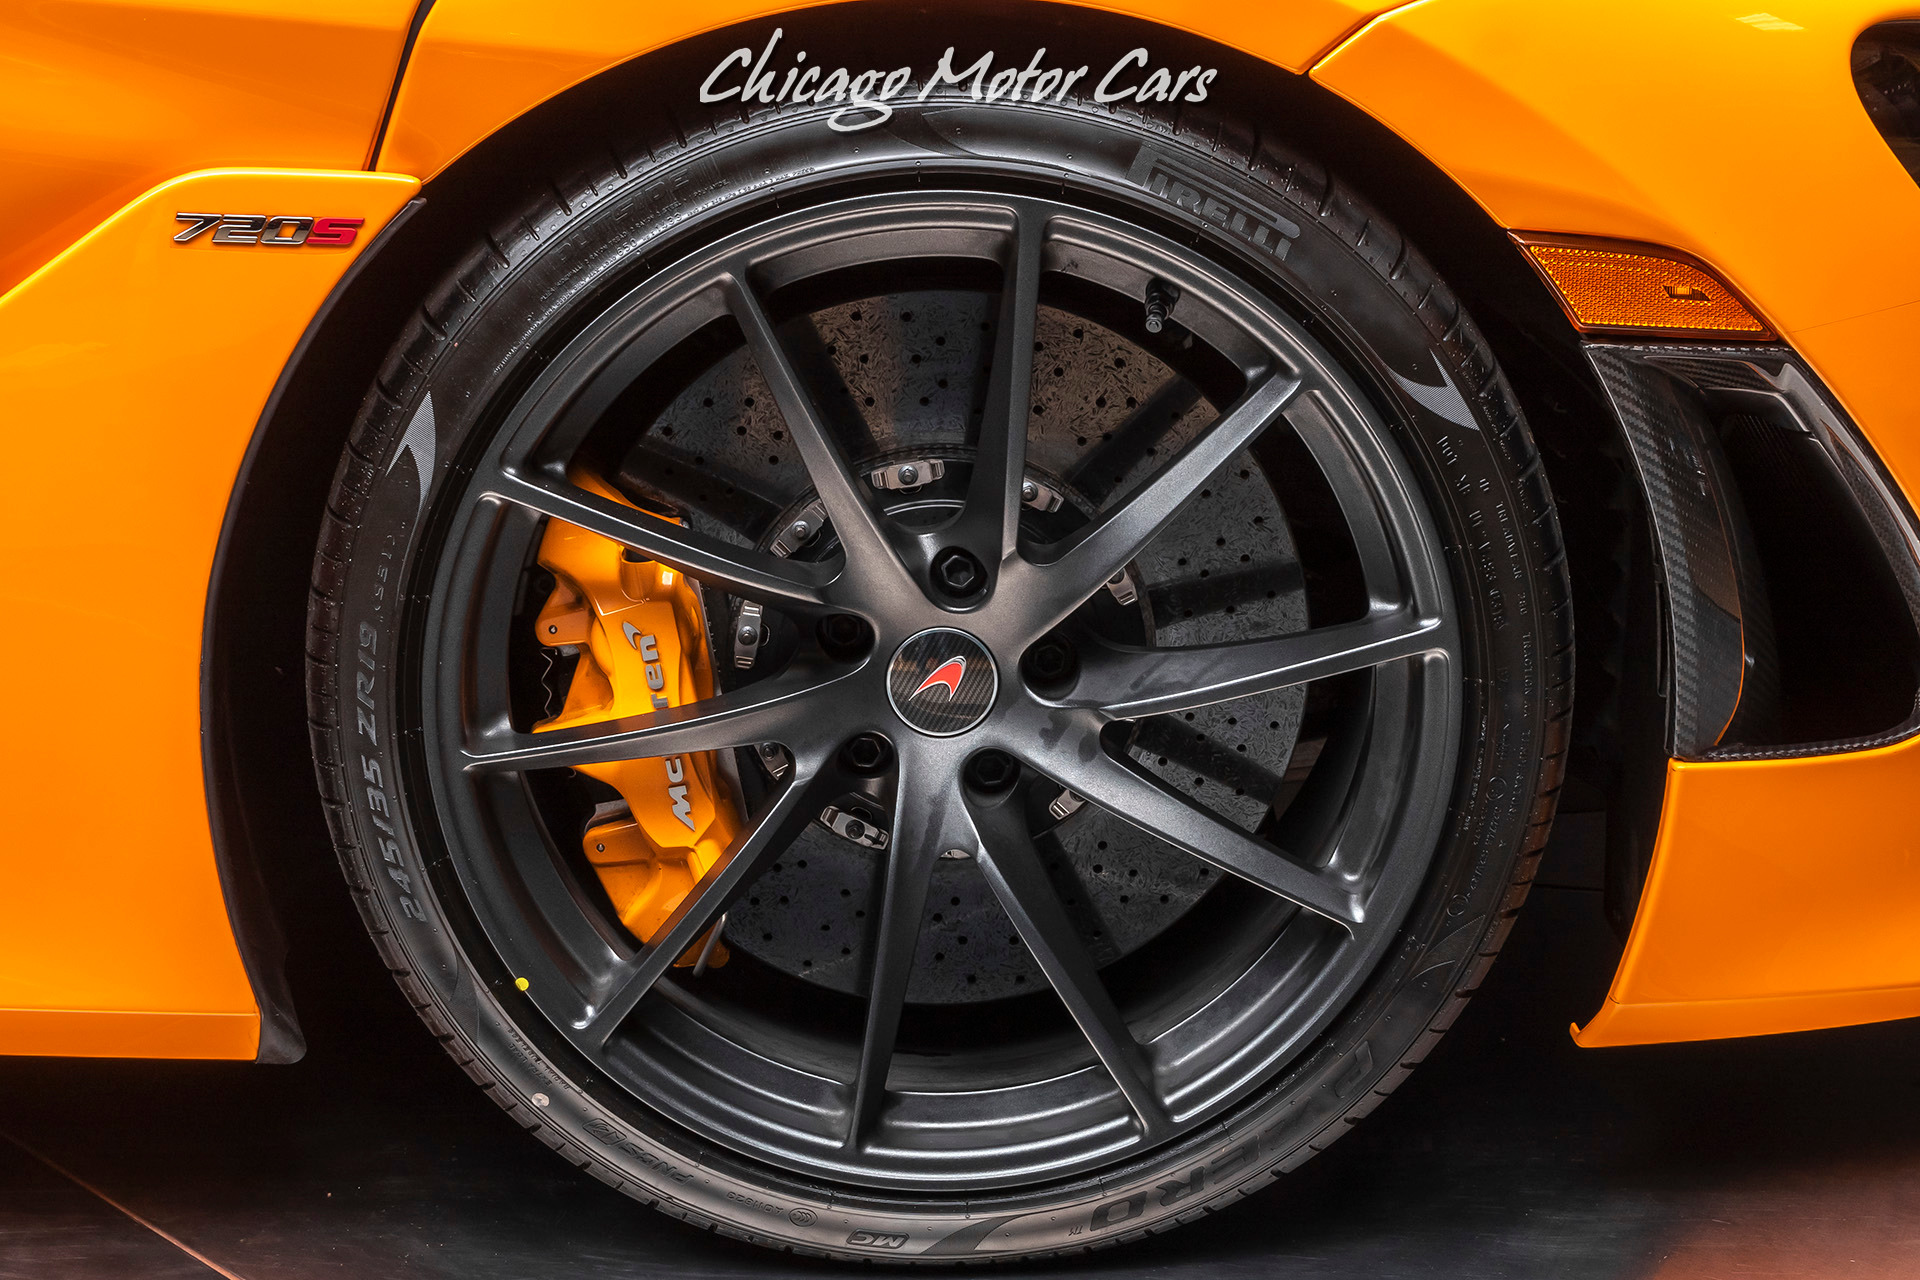 Used-2018-McLaren-720S-Coupe-Performance-Package-Carbon-Fiber